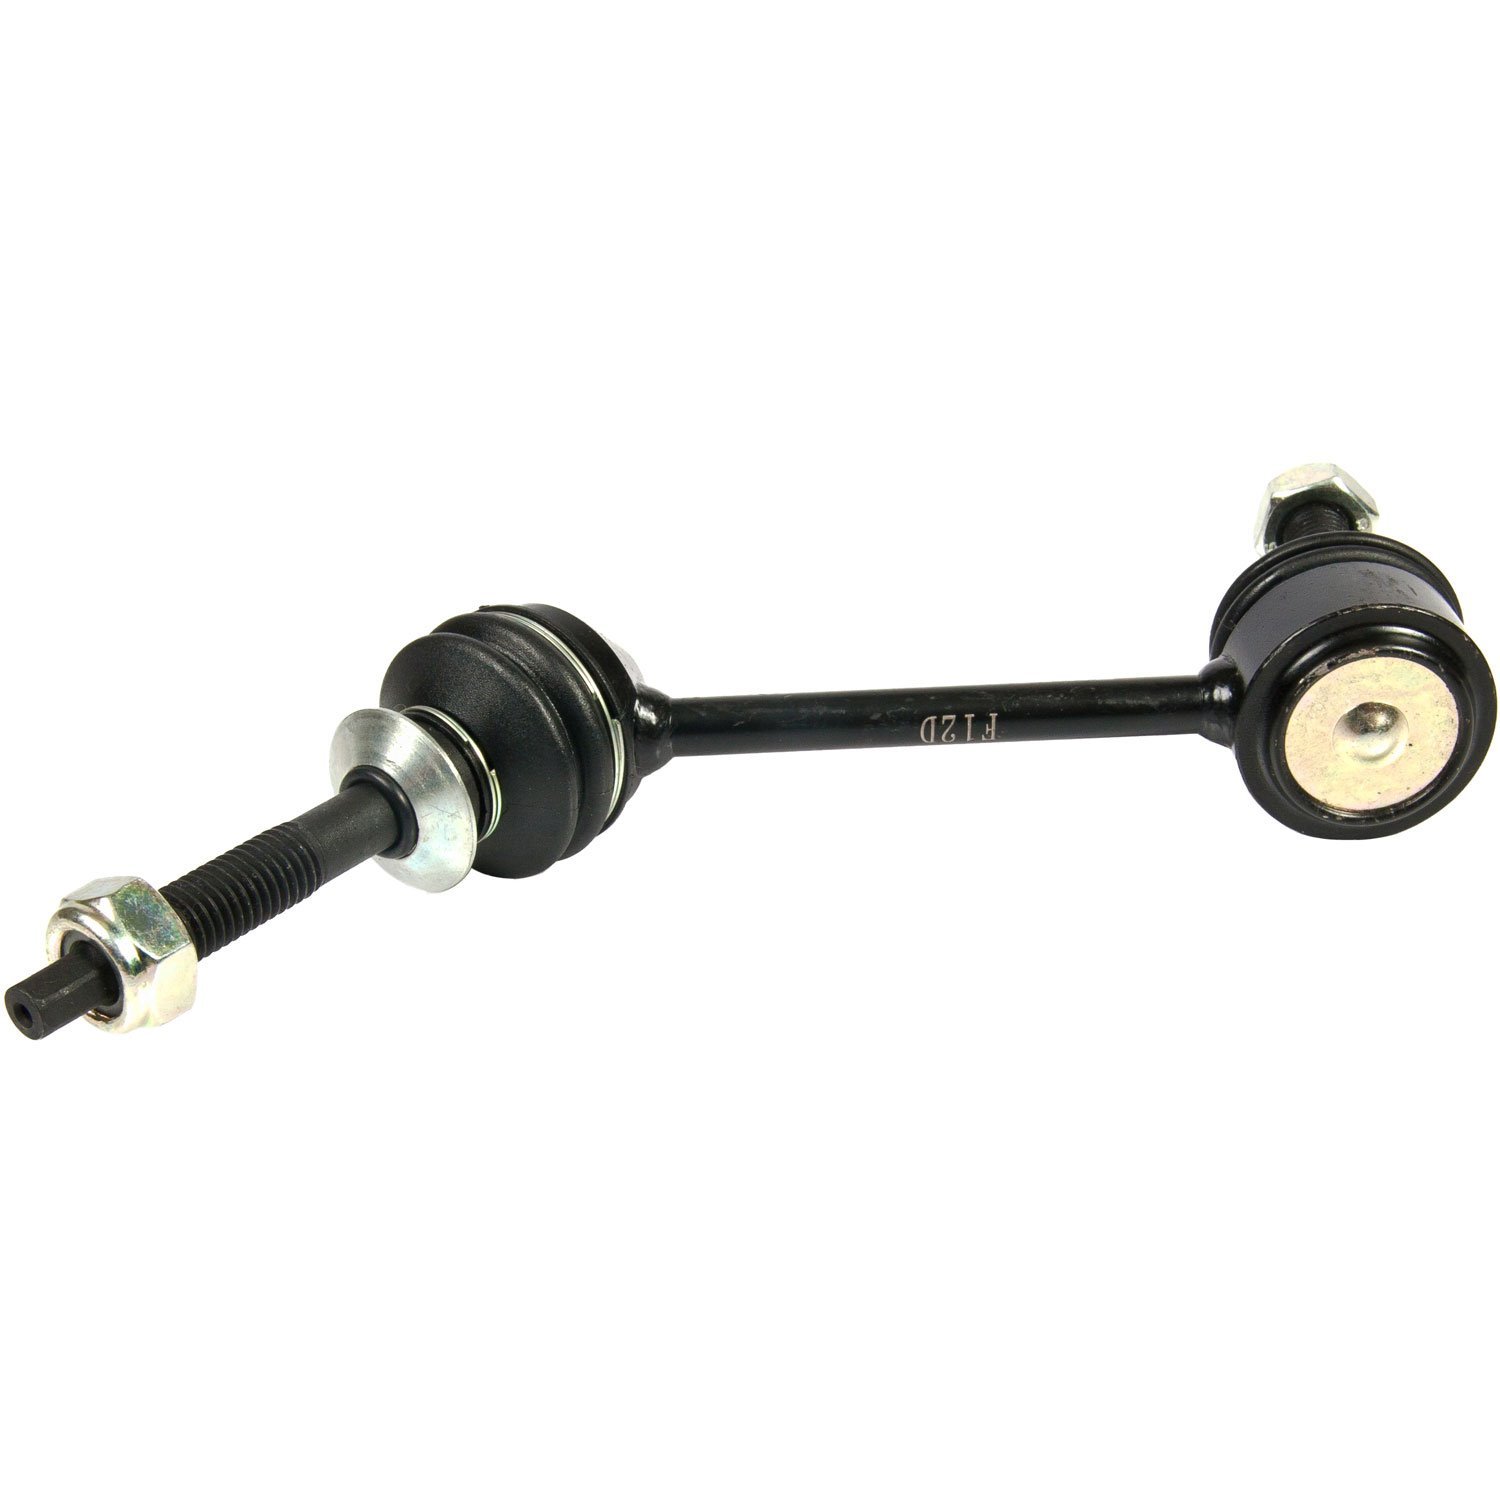 Front Sway Bar End Link for 2003-2011 Ford Crown Victoria/ Lincoln Town Car/Mercury Grand Marquis